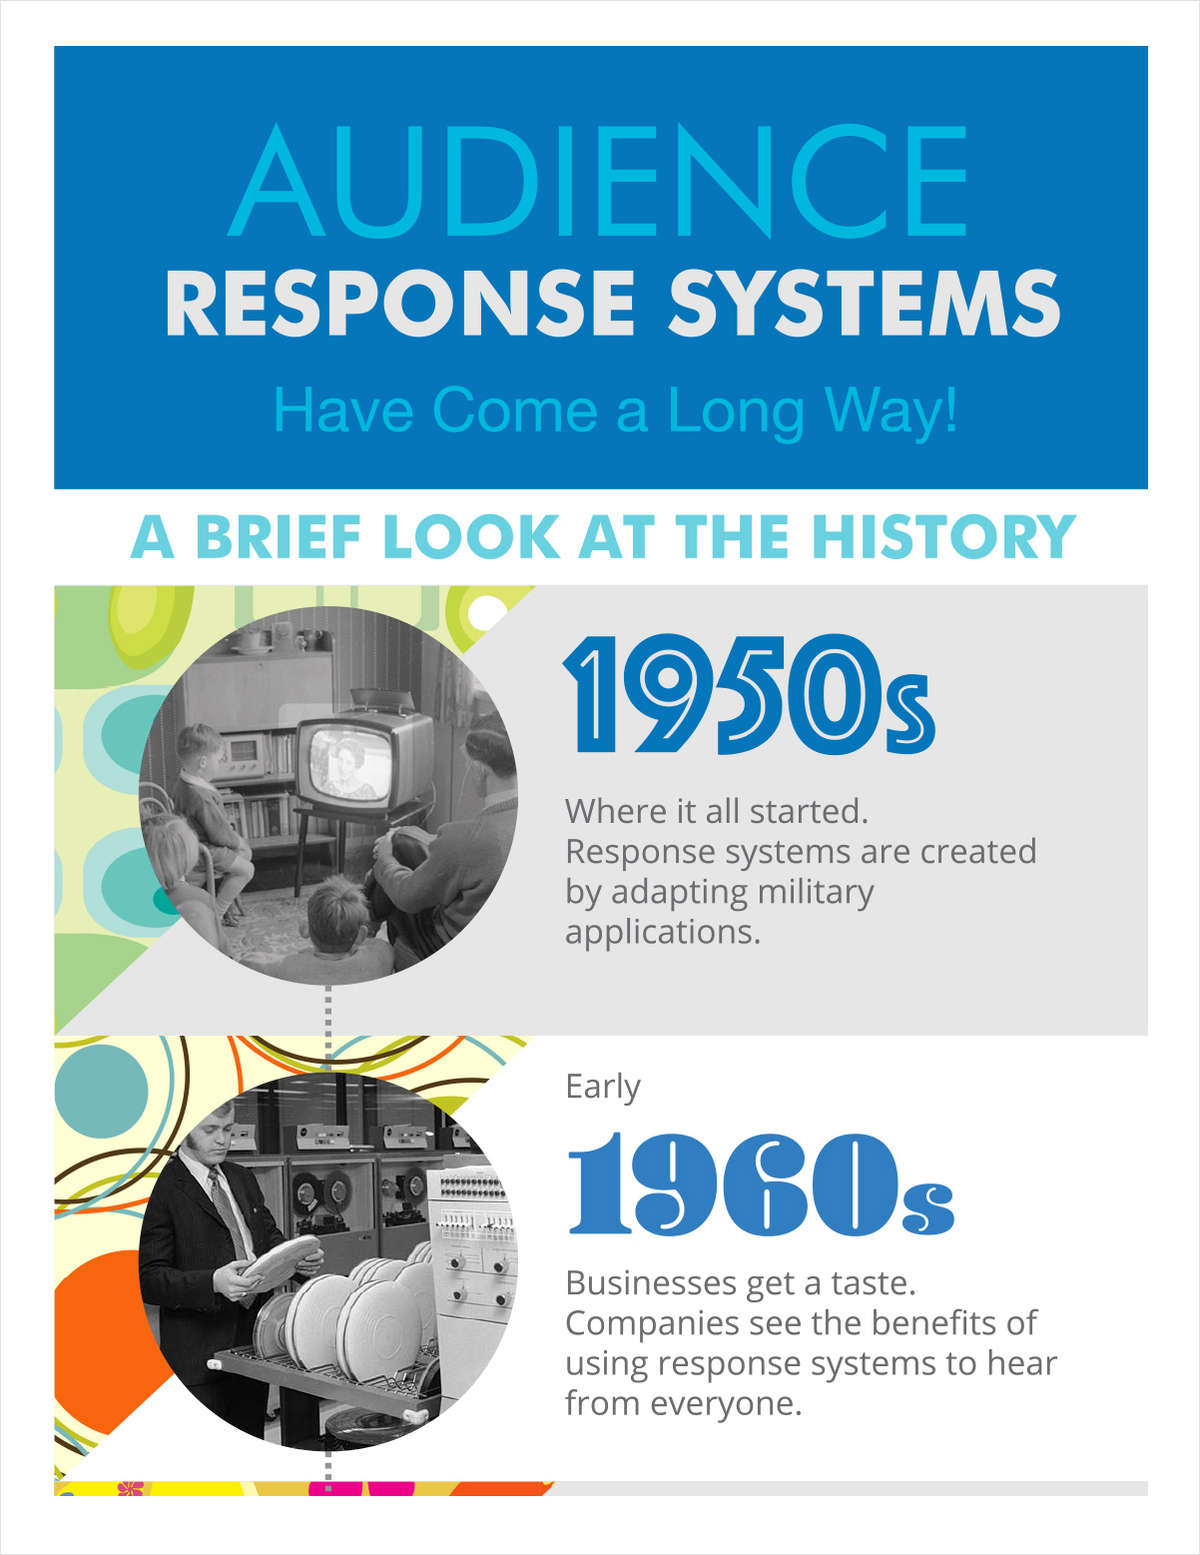 The Evolution of Assessment Technology: A Brief Look at the History